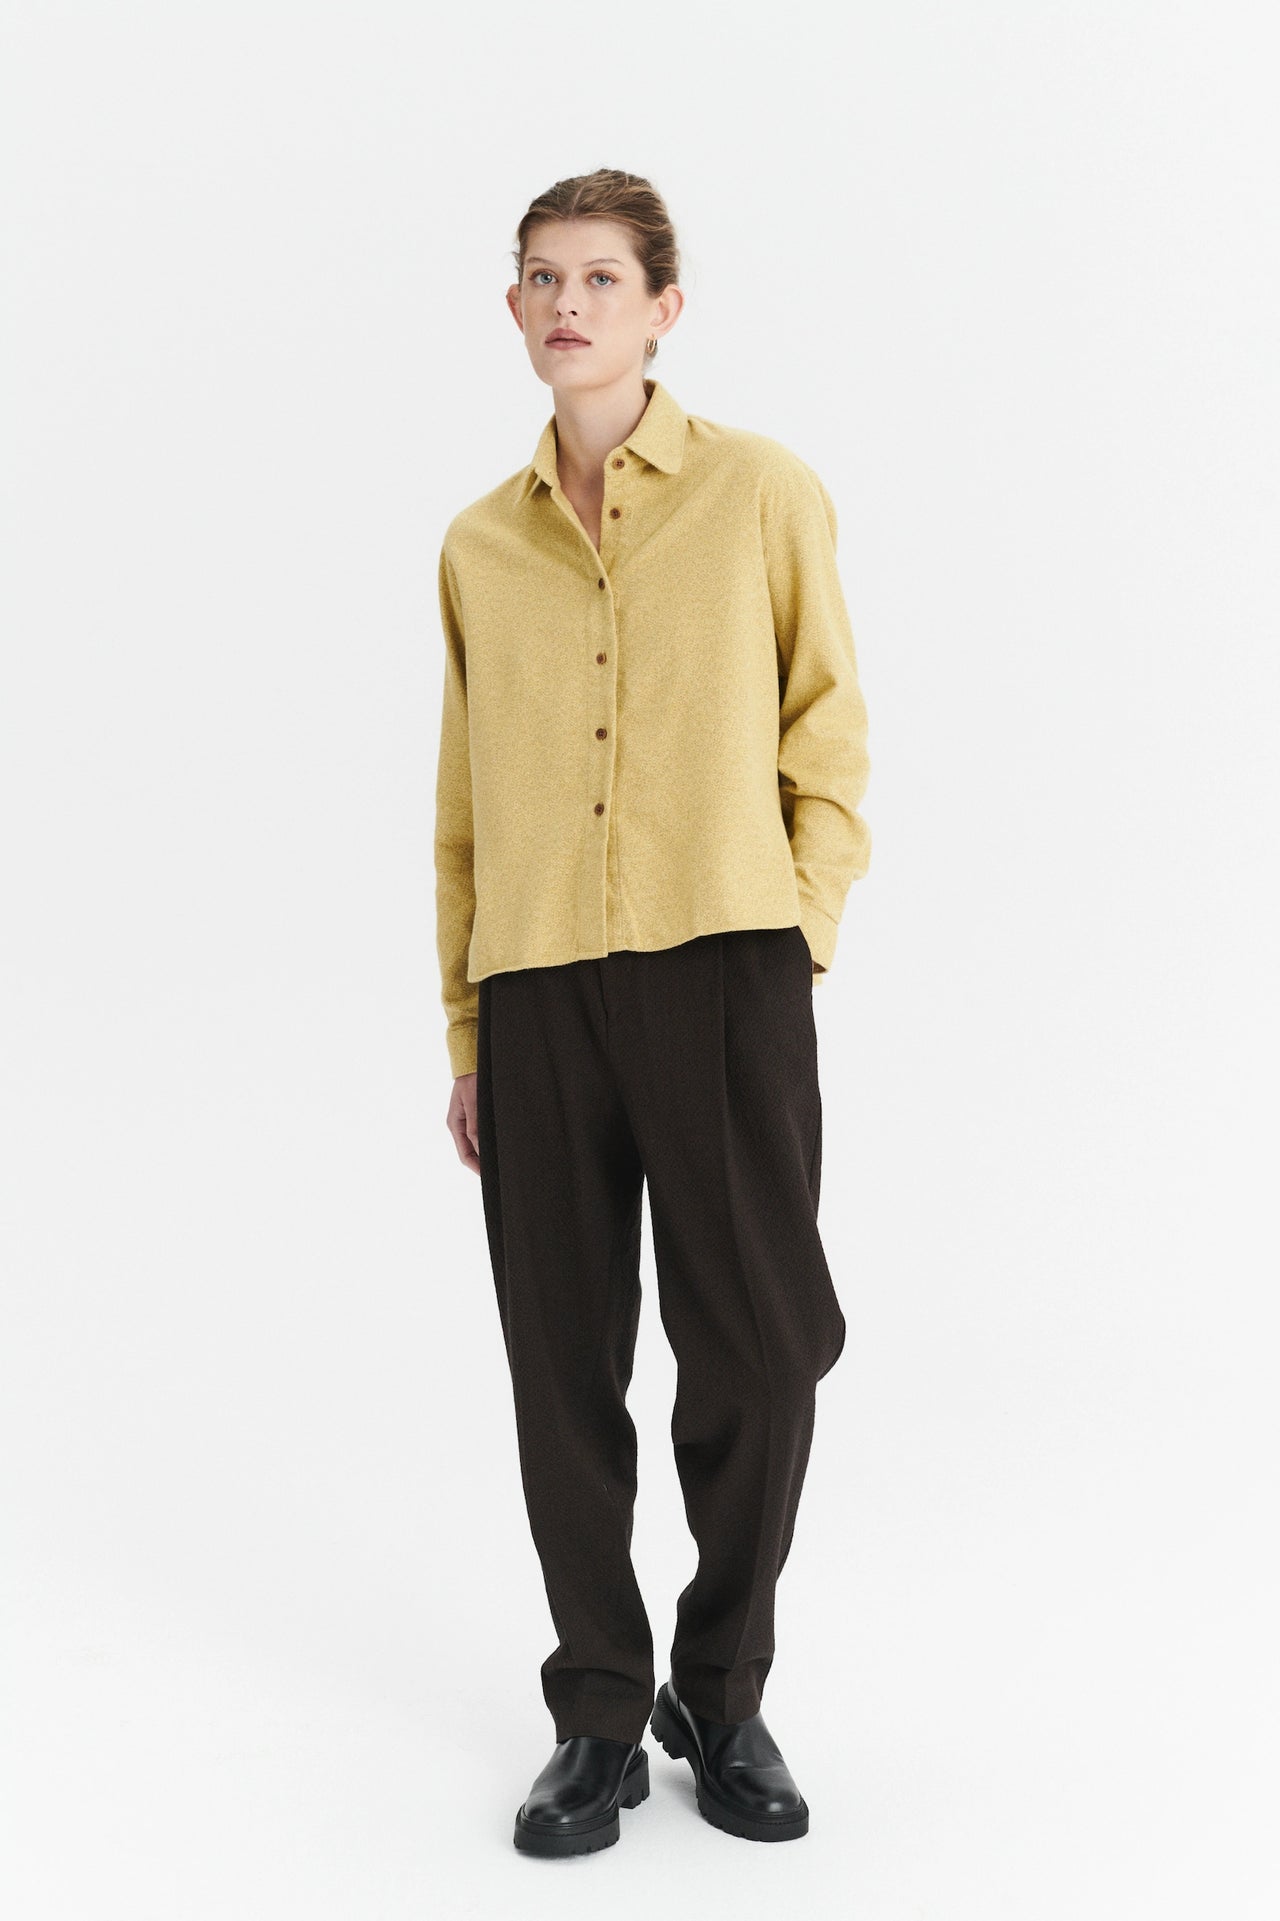 Shirt in the Finest Yellow and Beige Portuguese Cotton Flannel